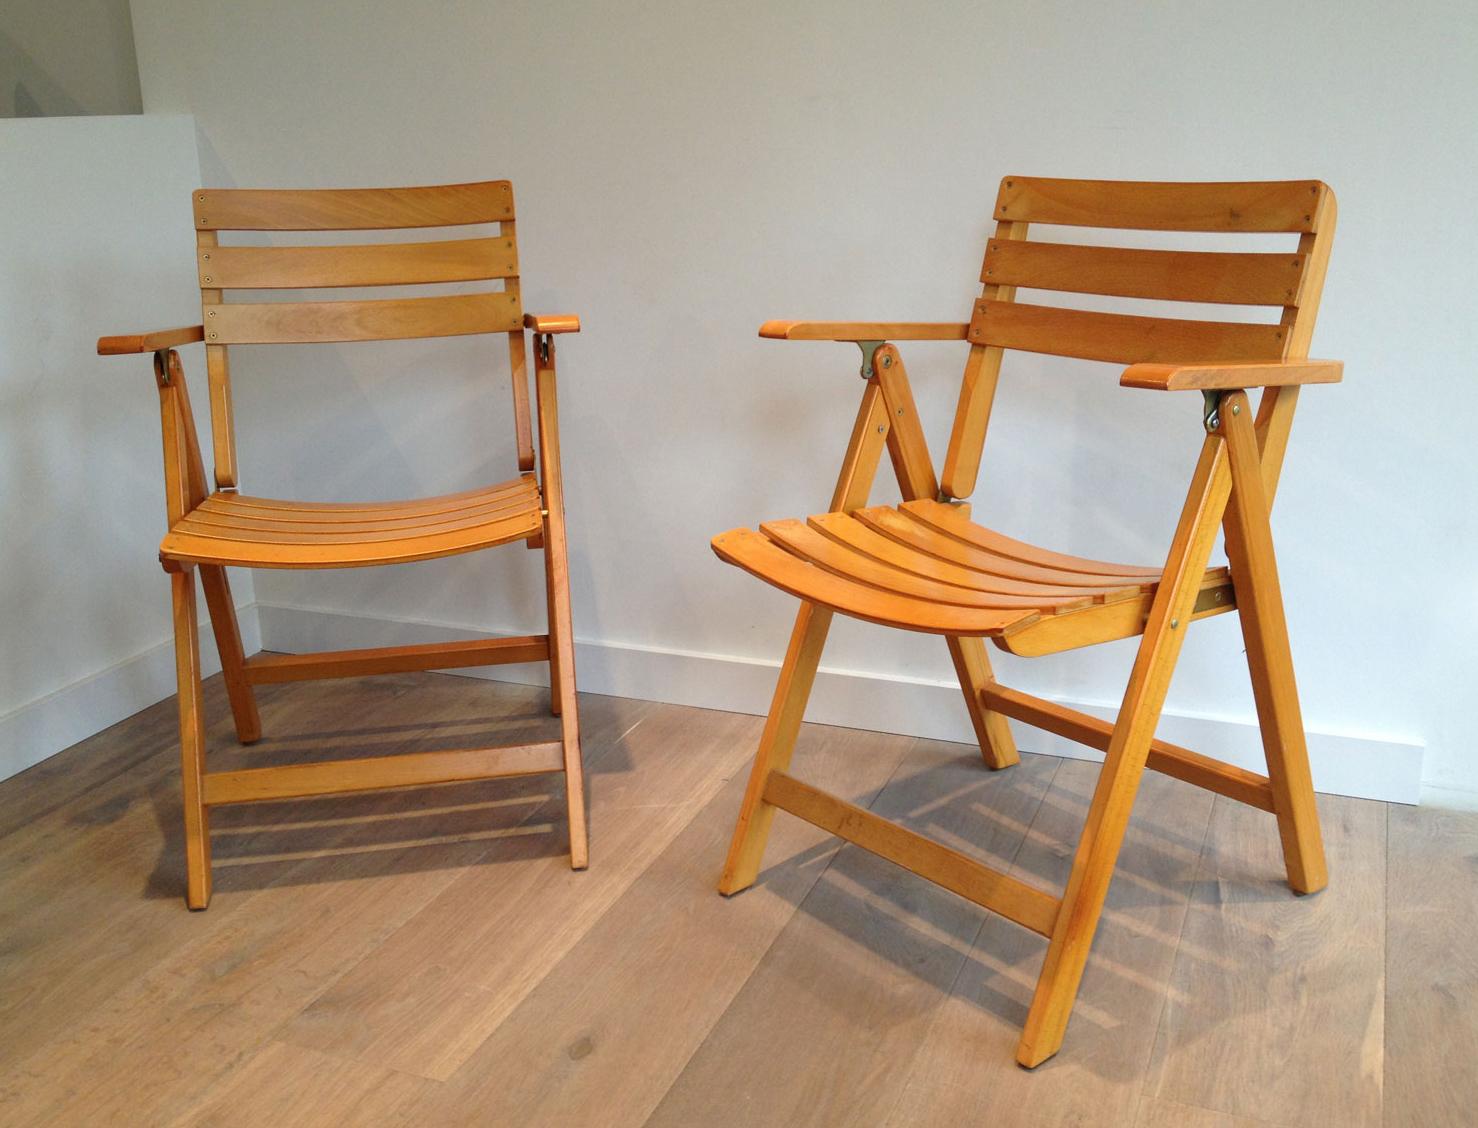 This pair of folding armchairs are made of vernished wwood. This is a French work signed Clairitex. Circa 1970.